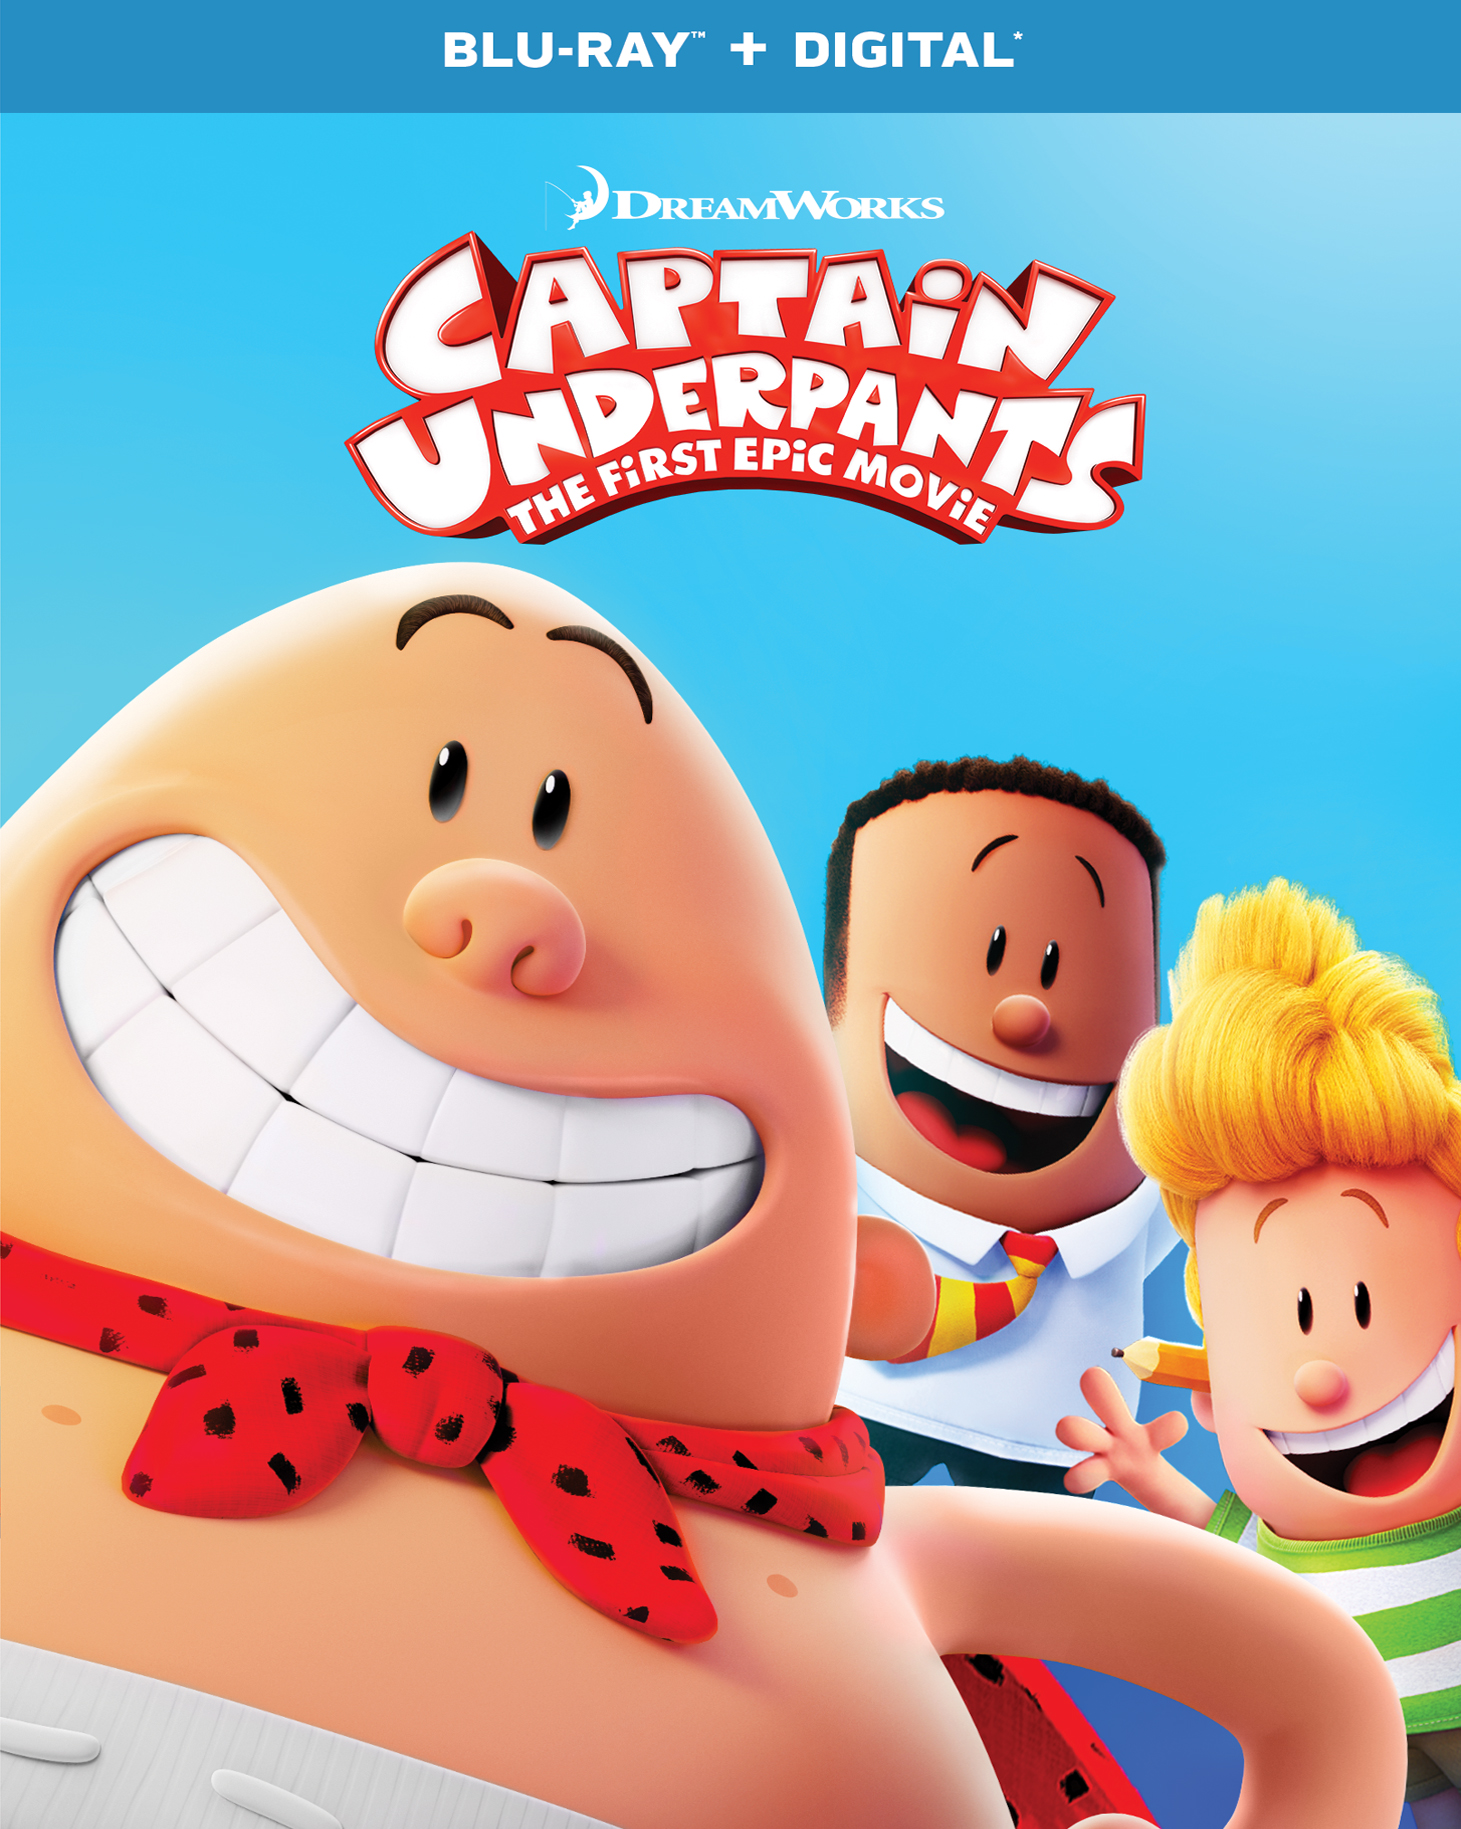 Captain Underpants: The First Epic Movie [Blu-ray] [2017] - Best Buy